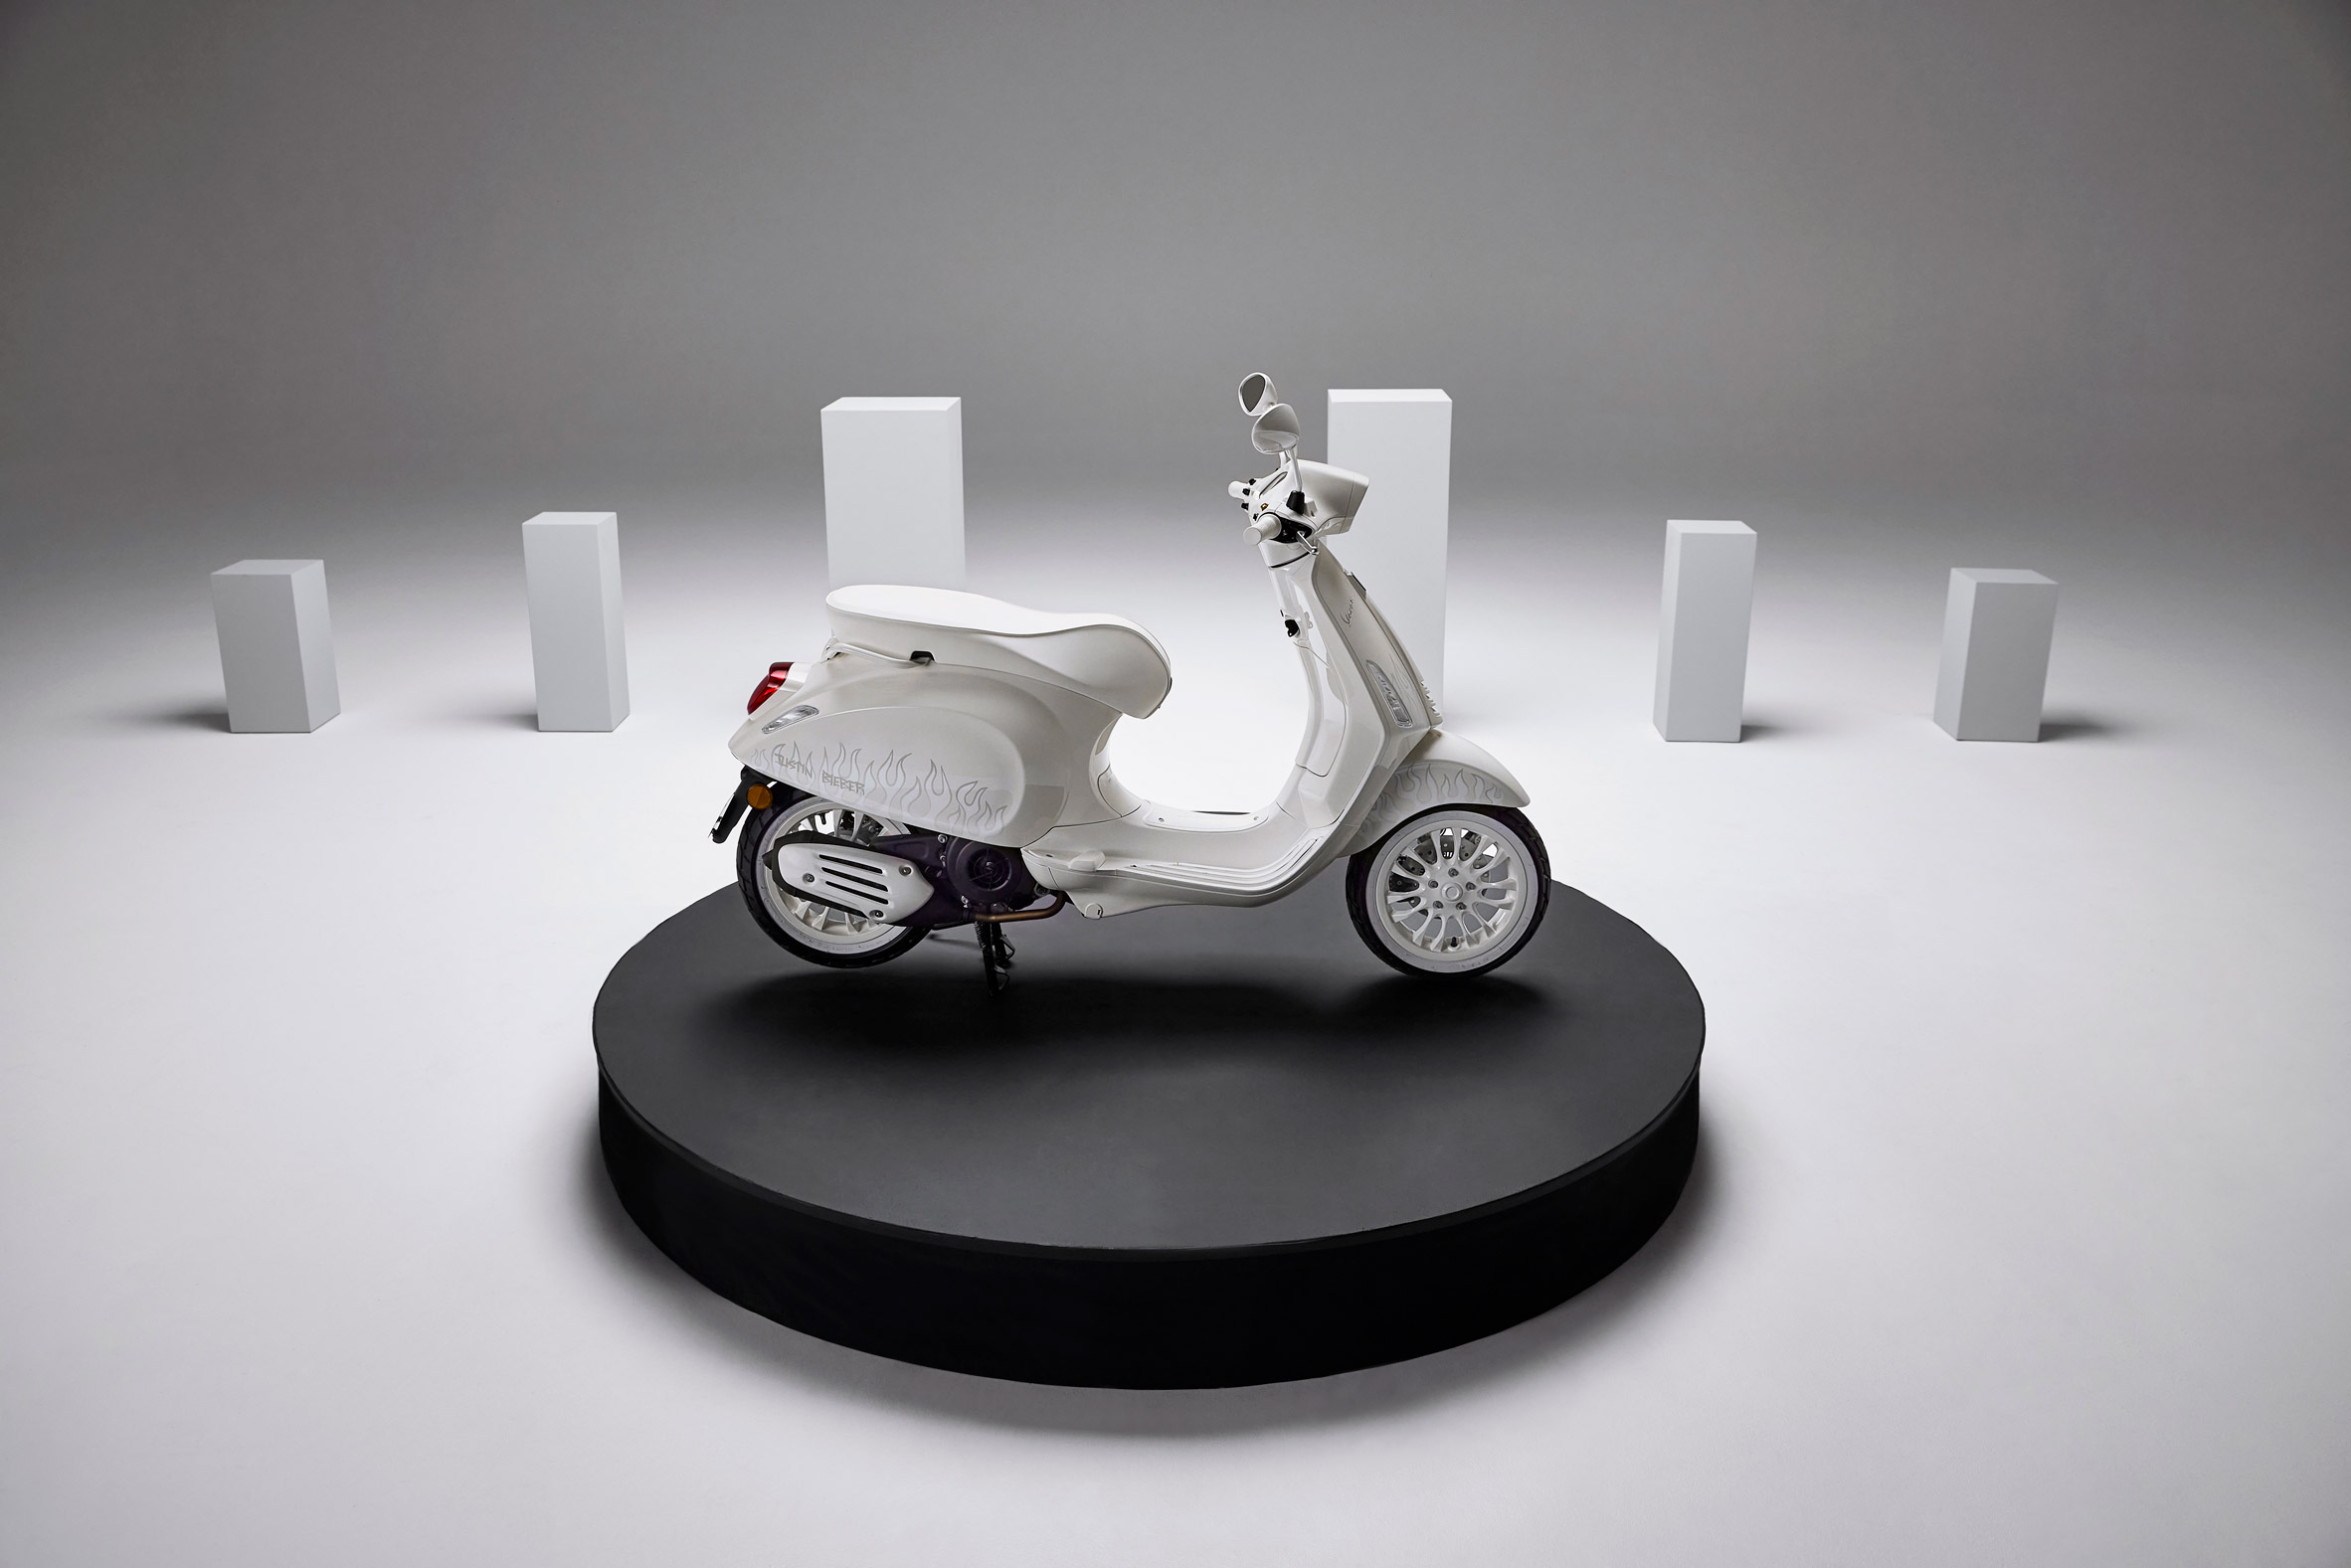 Justin Bieber ventures into scooter design with flaming all-white